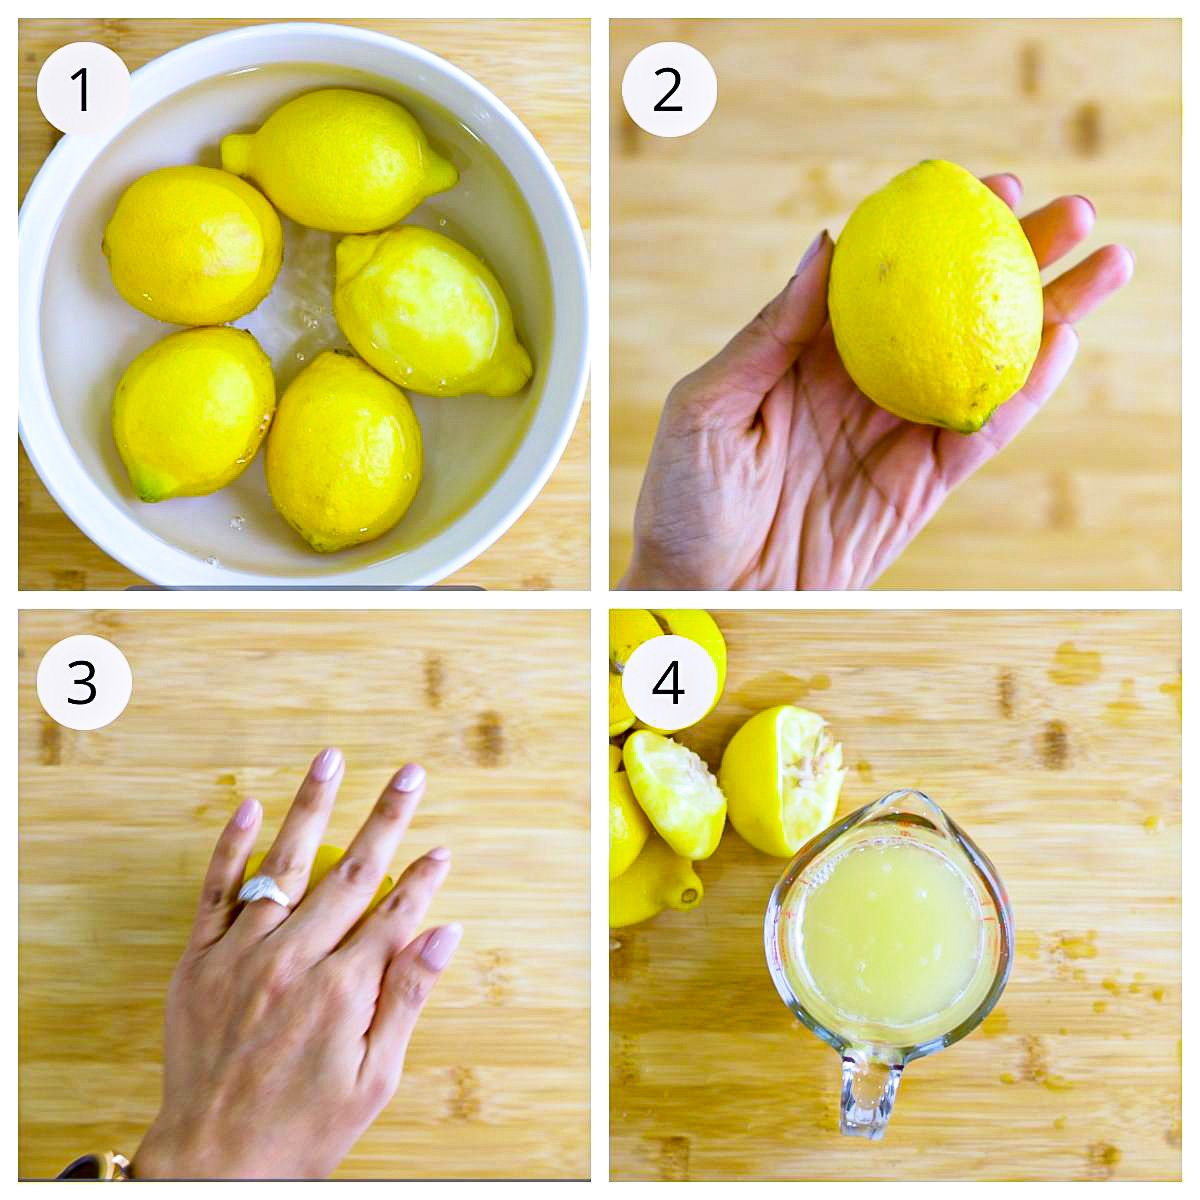 Steps showing 3 ways to get more juice out of a lemon